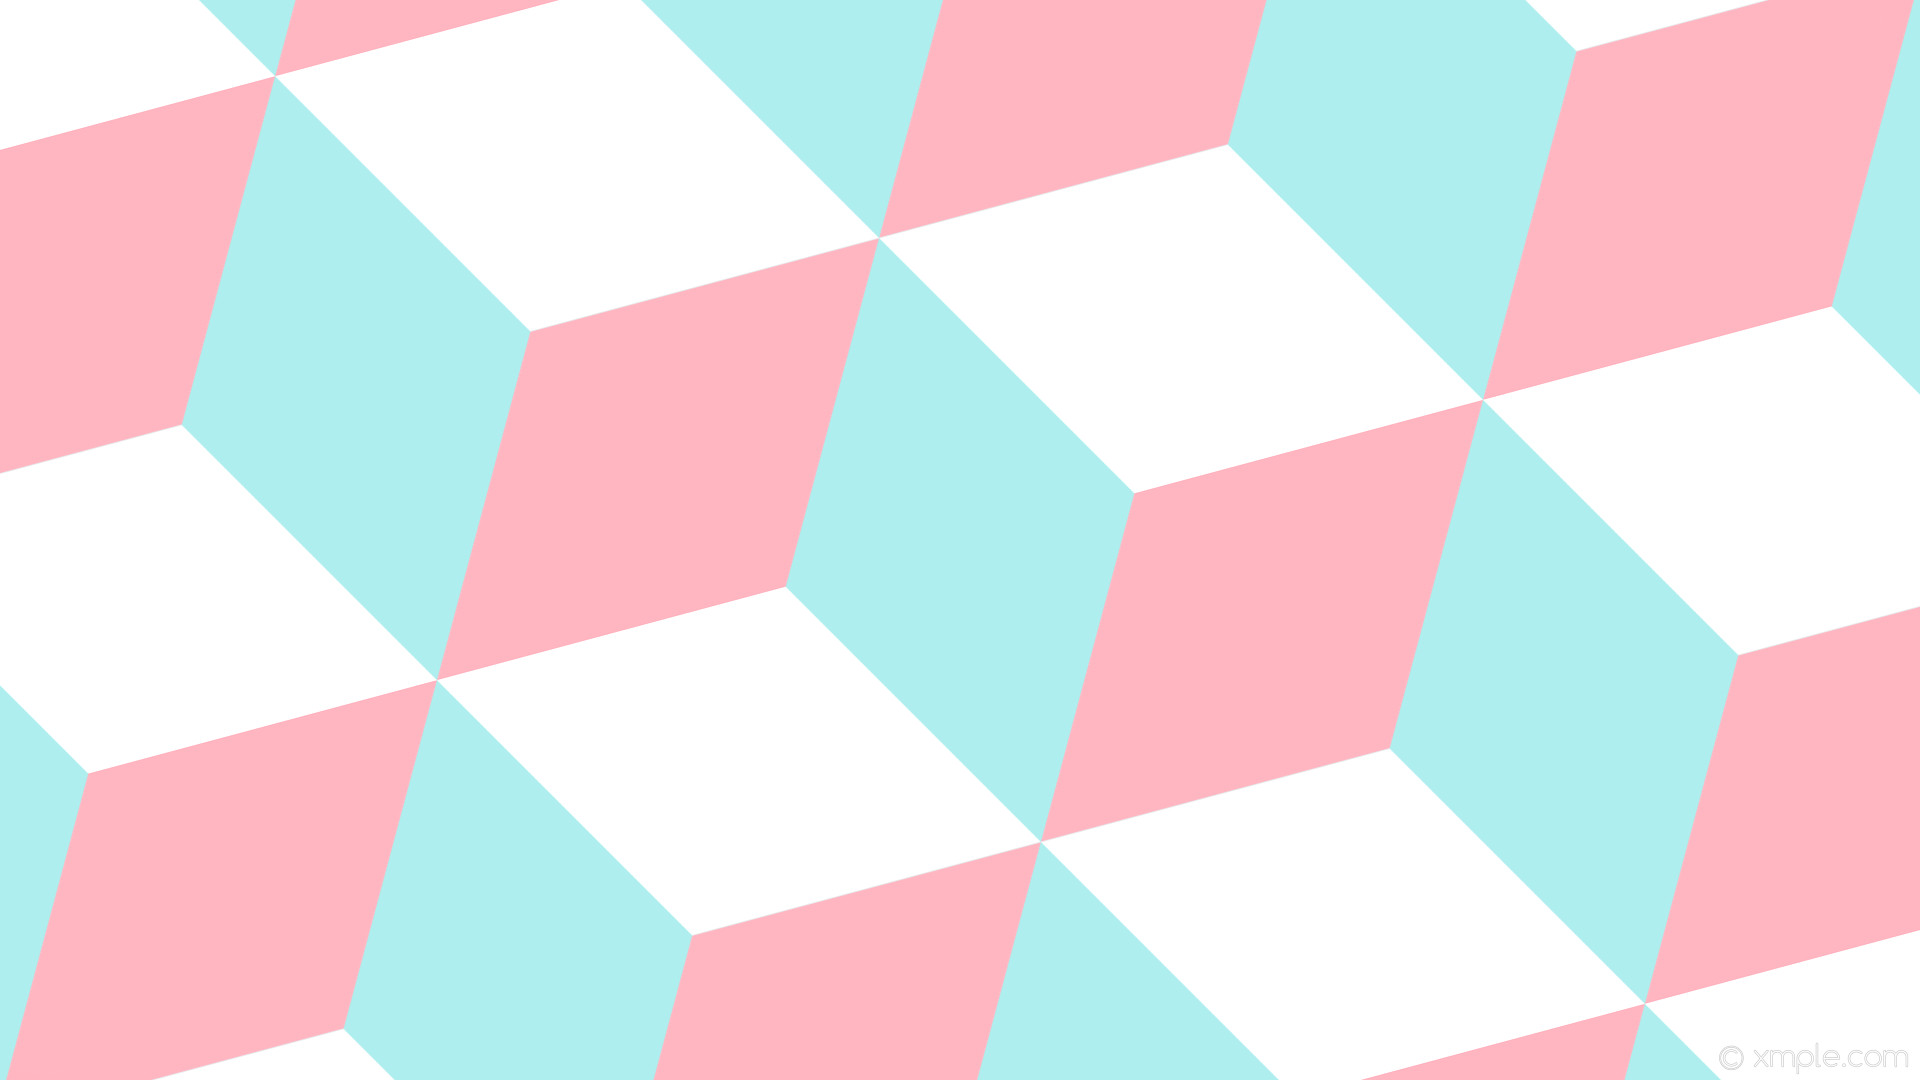 Wallpaper 3d Cubes Blue White Pink Pale Turquoise Light - Background Pink  And Blue - 1920x1080 Wallpaper 